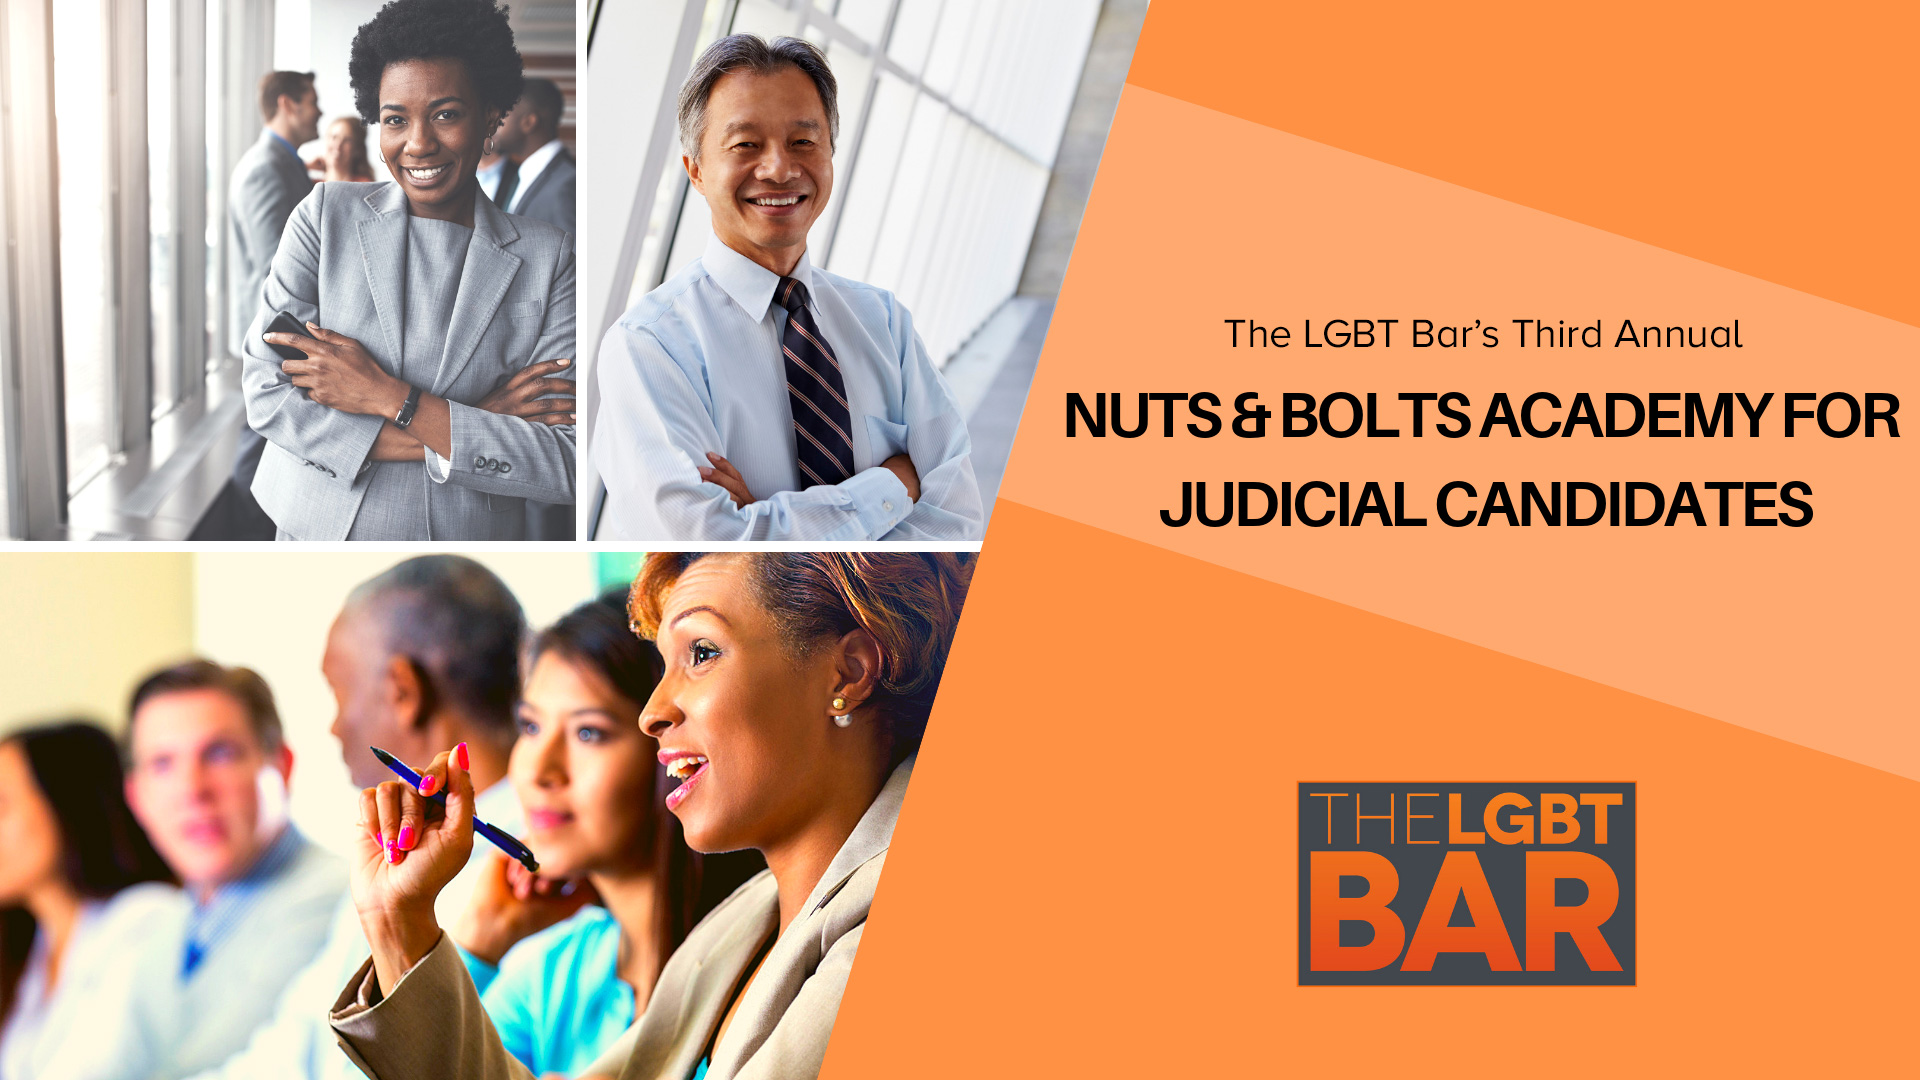 The LGBT Bar's Third Annual Nuts & Bolts Academy For Judicial Candidates